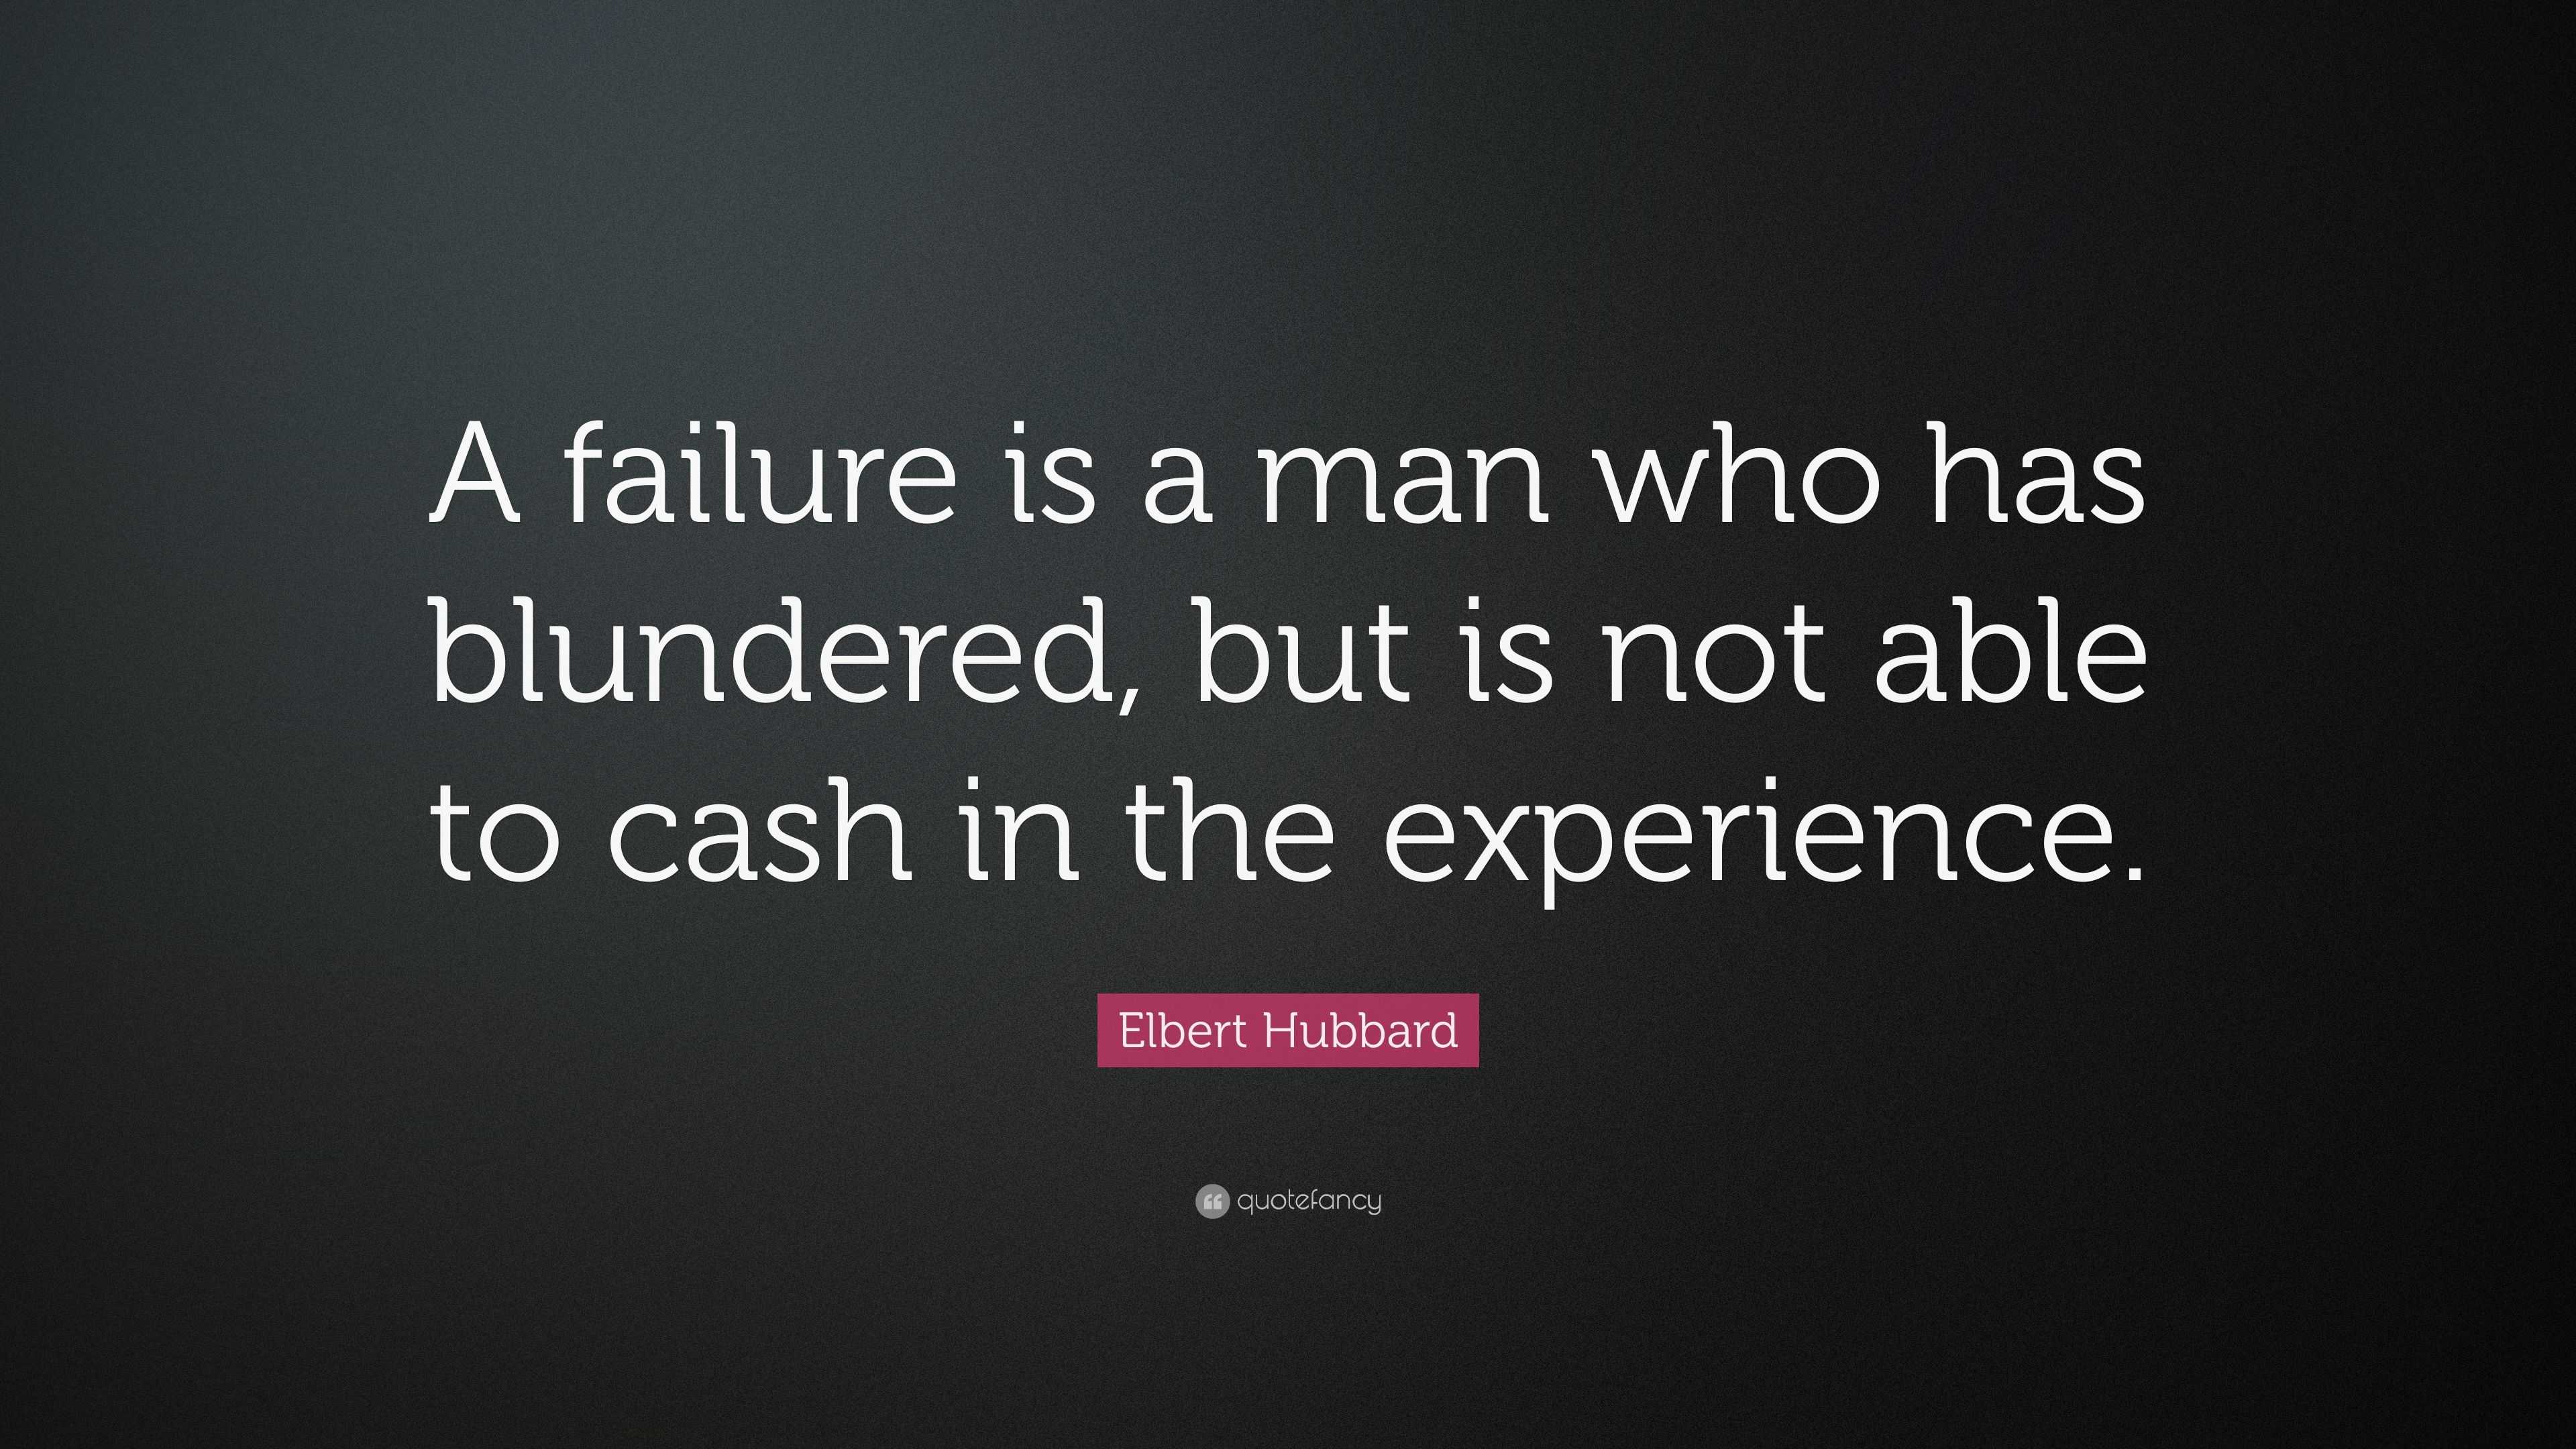 A failure is a man who has blundered, but is - Quote